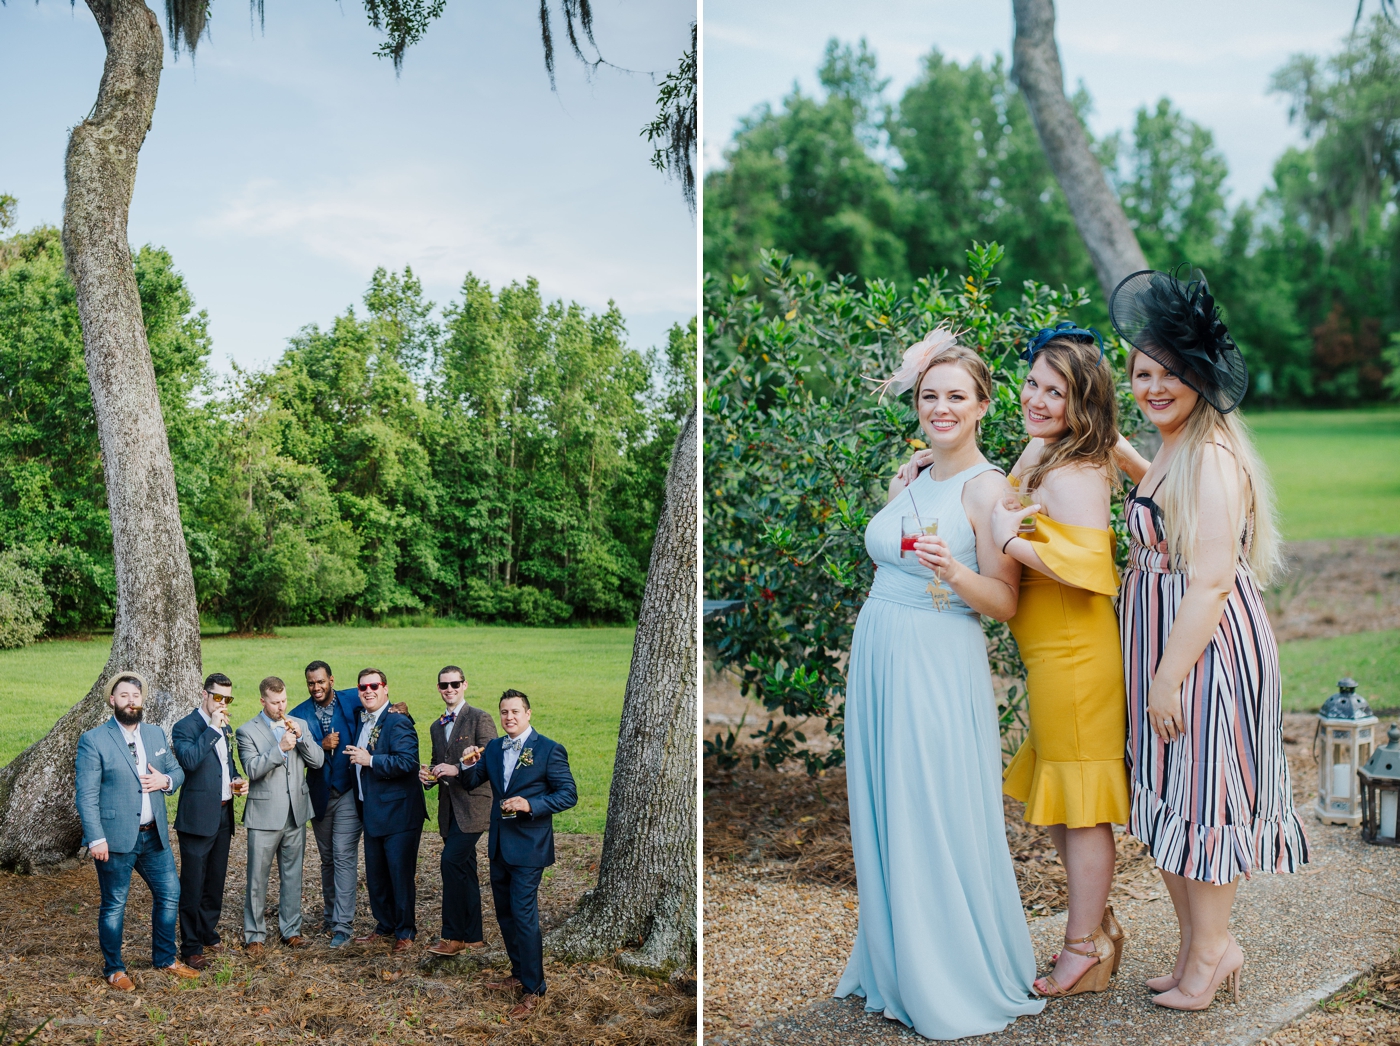 Colorful wedding reception at Dorchester Shooting Preserve